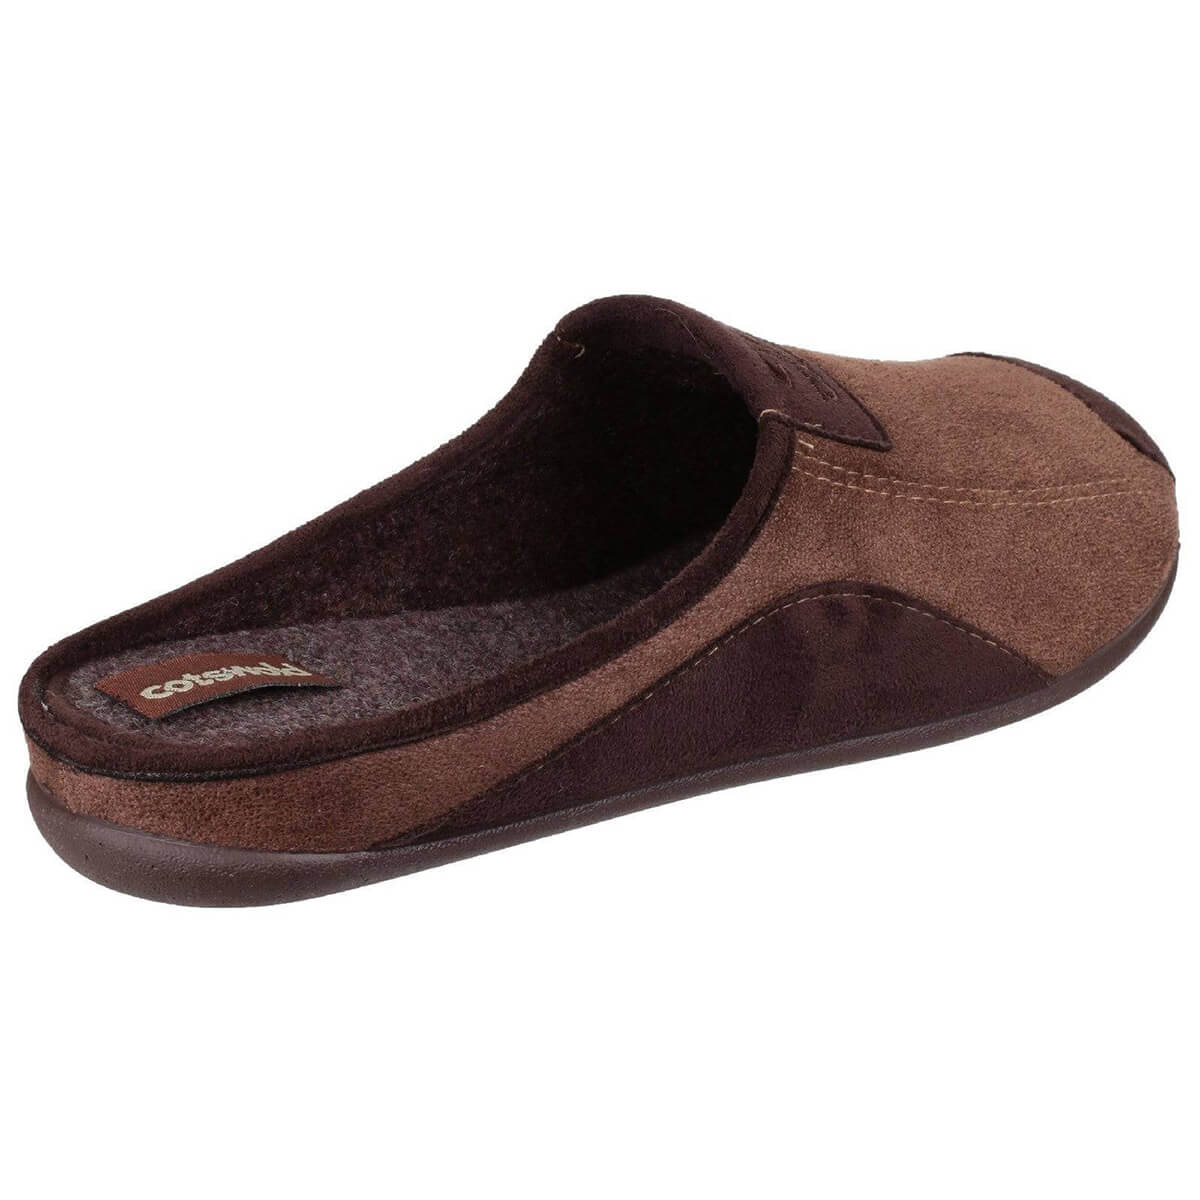 Cotswold Westwell Mens Suede Loafer Mule Slippers - Shoe Store Direct